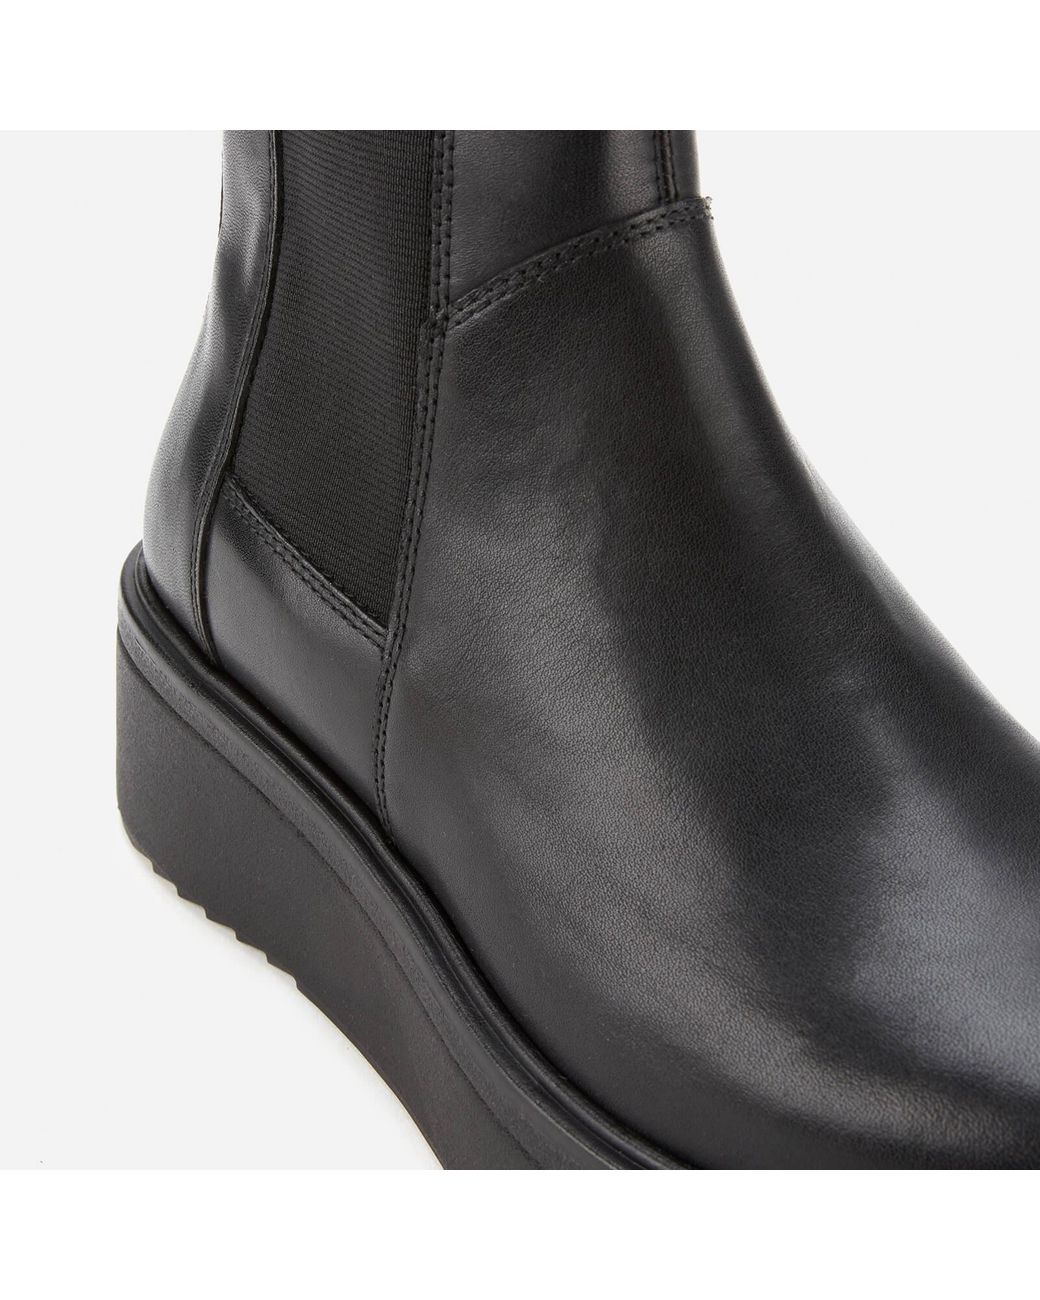 Vagabond Shoemakers Tara Leather Chunky Chelsea Boots in Black | Lyst